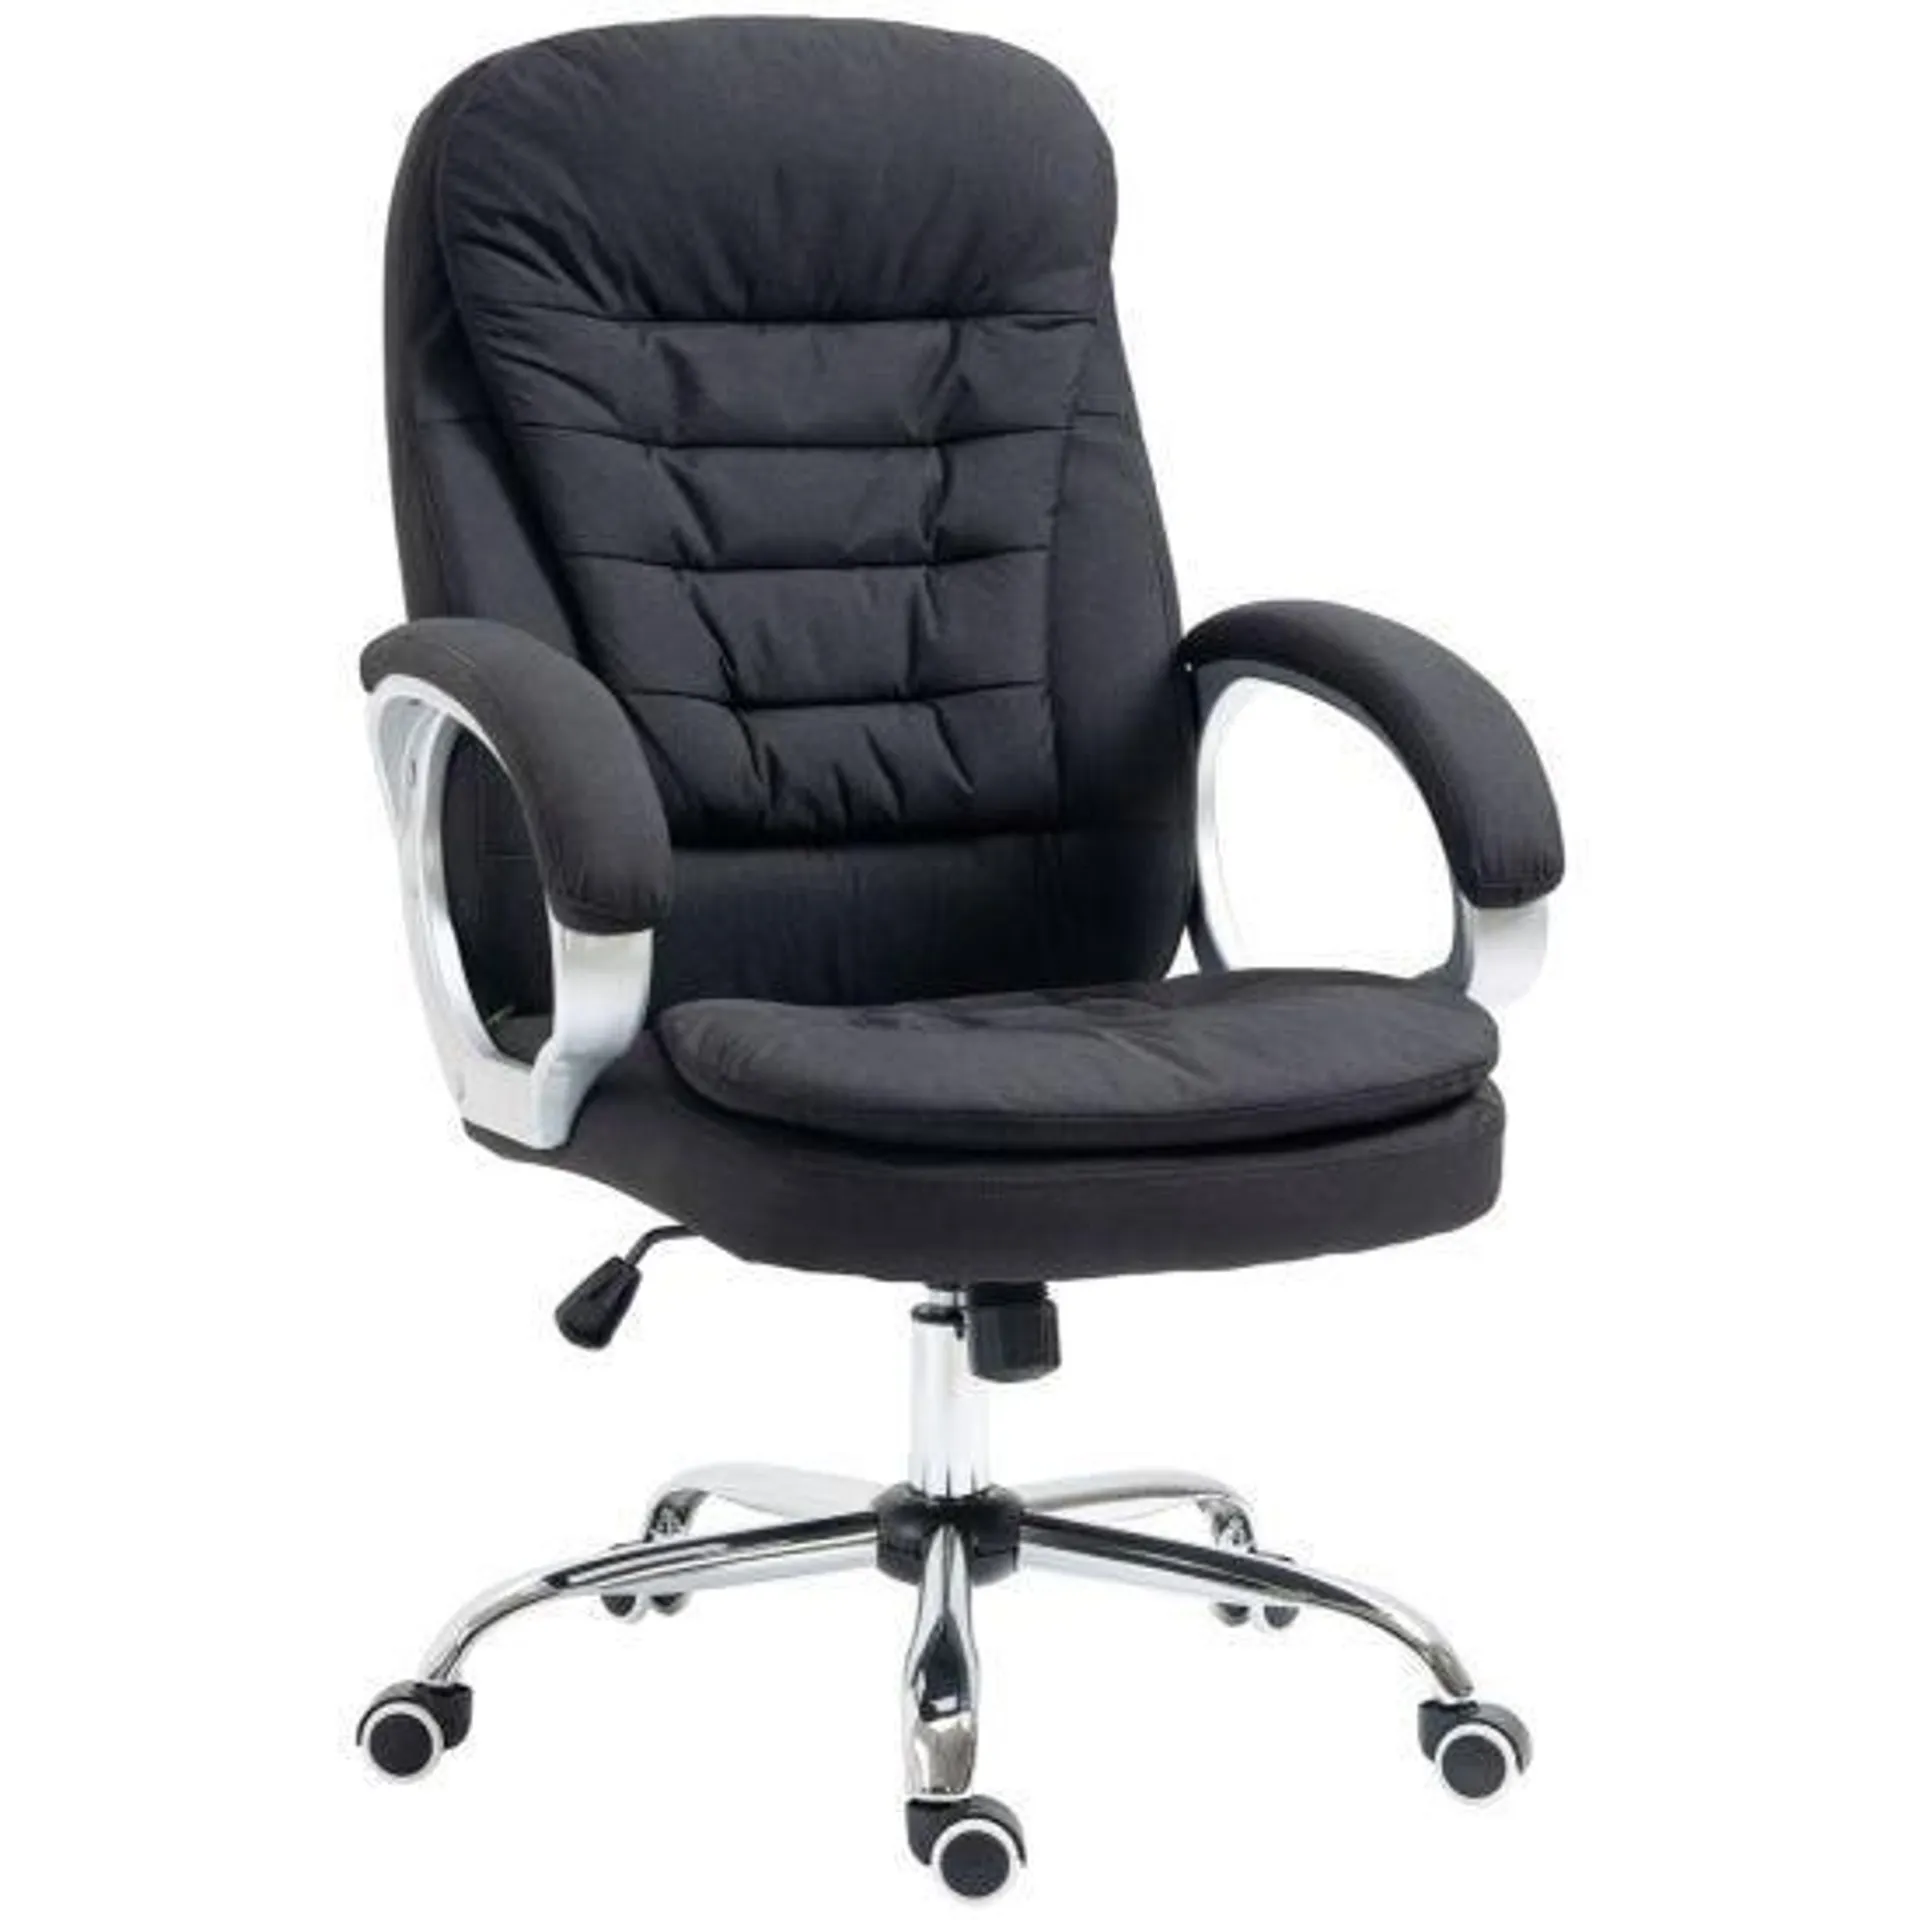 Vinsetto Adjustable Height Executive Office Chair in Black